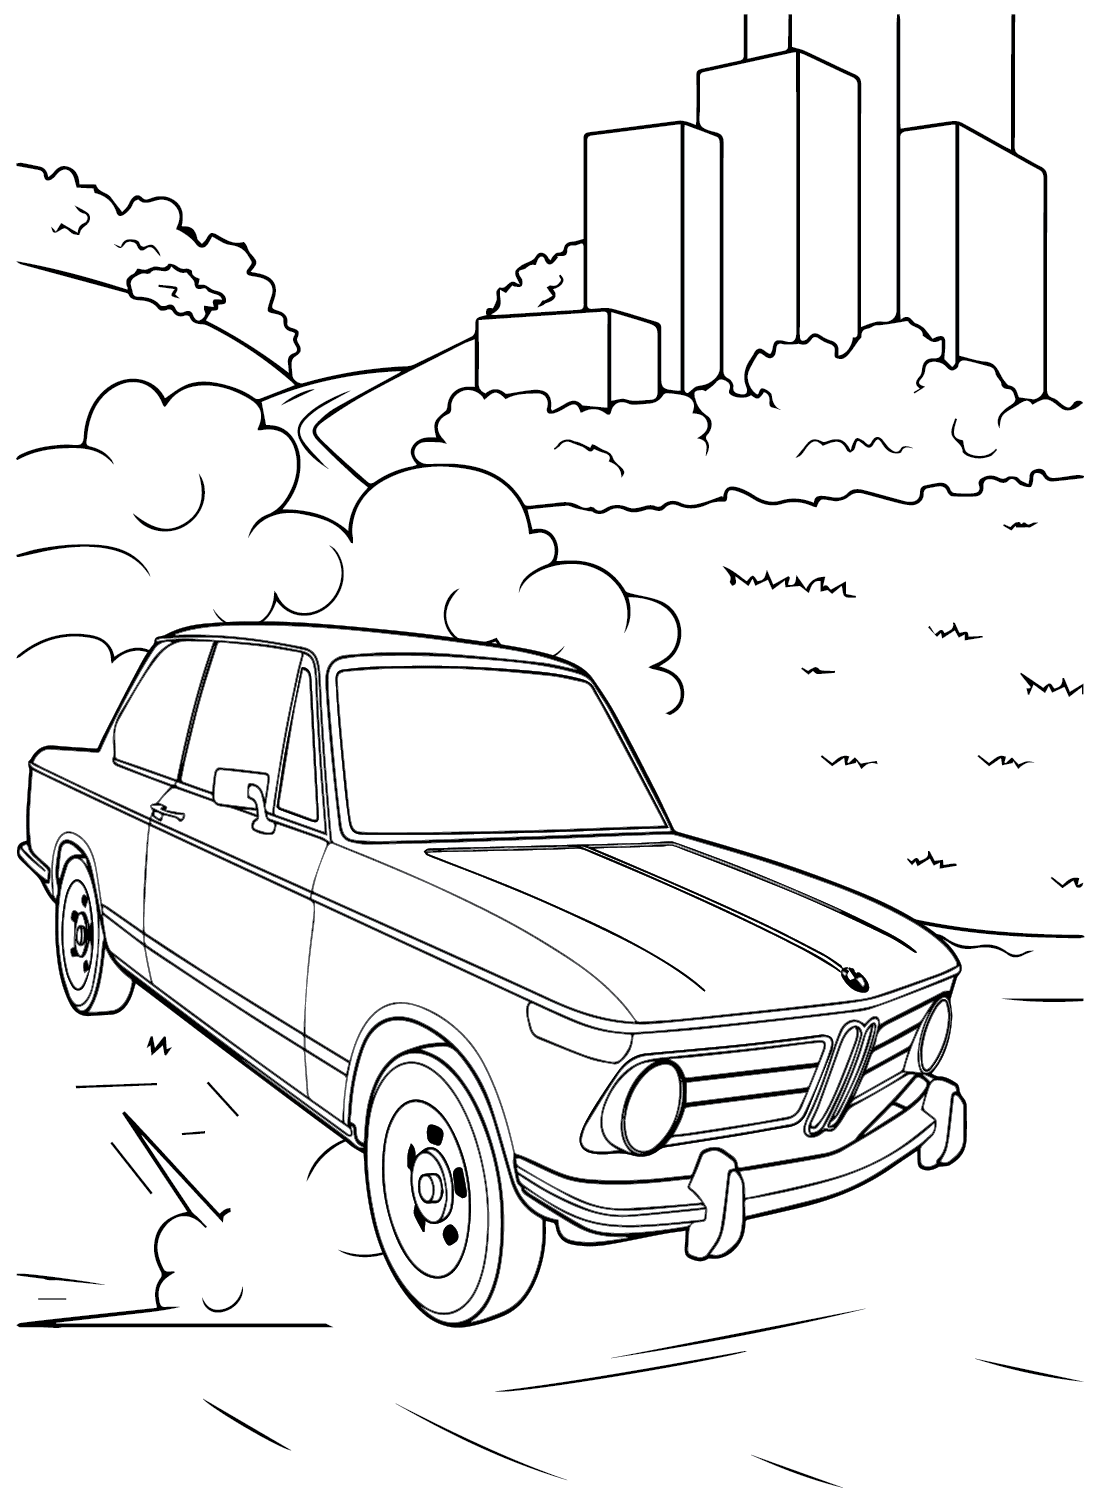 1973 BMW 2002 TII Coloring Page from BMW